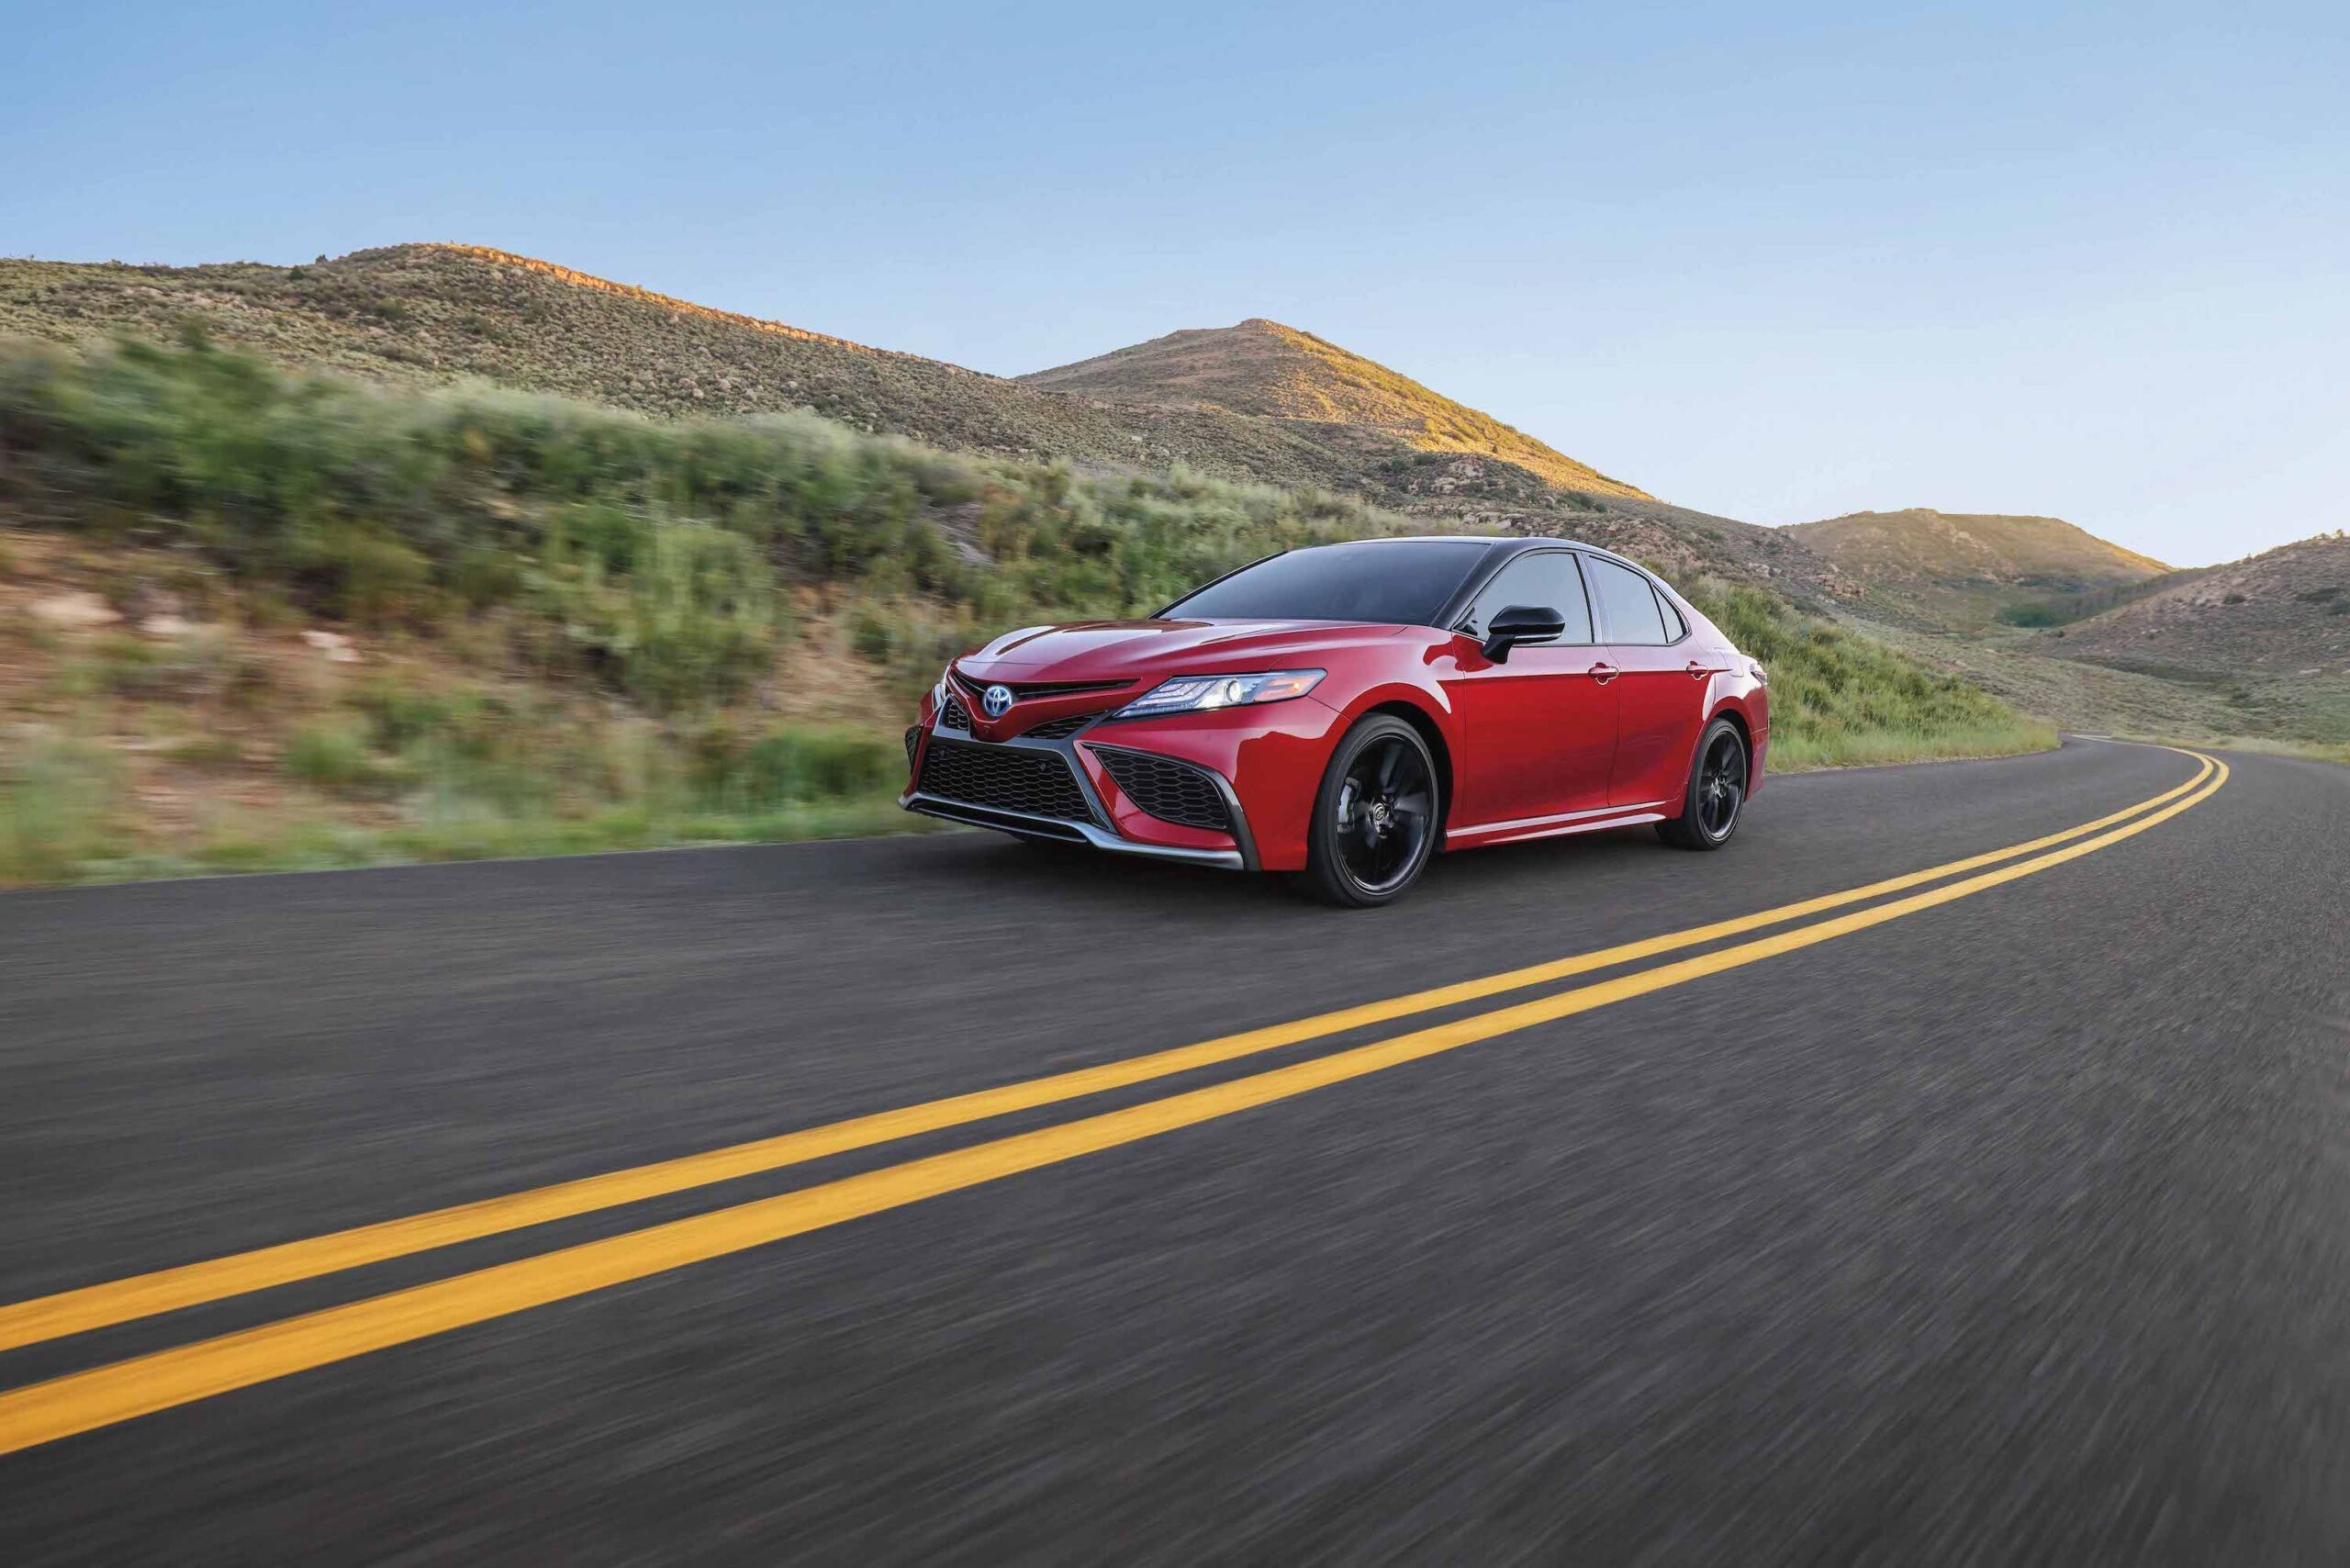 The Appeal of the Honda Civic and Toyota Camry